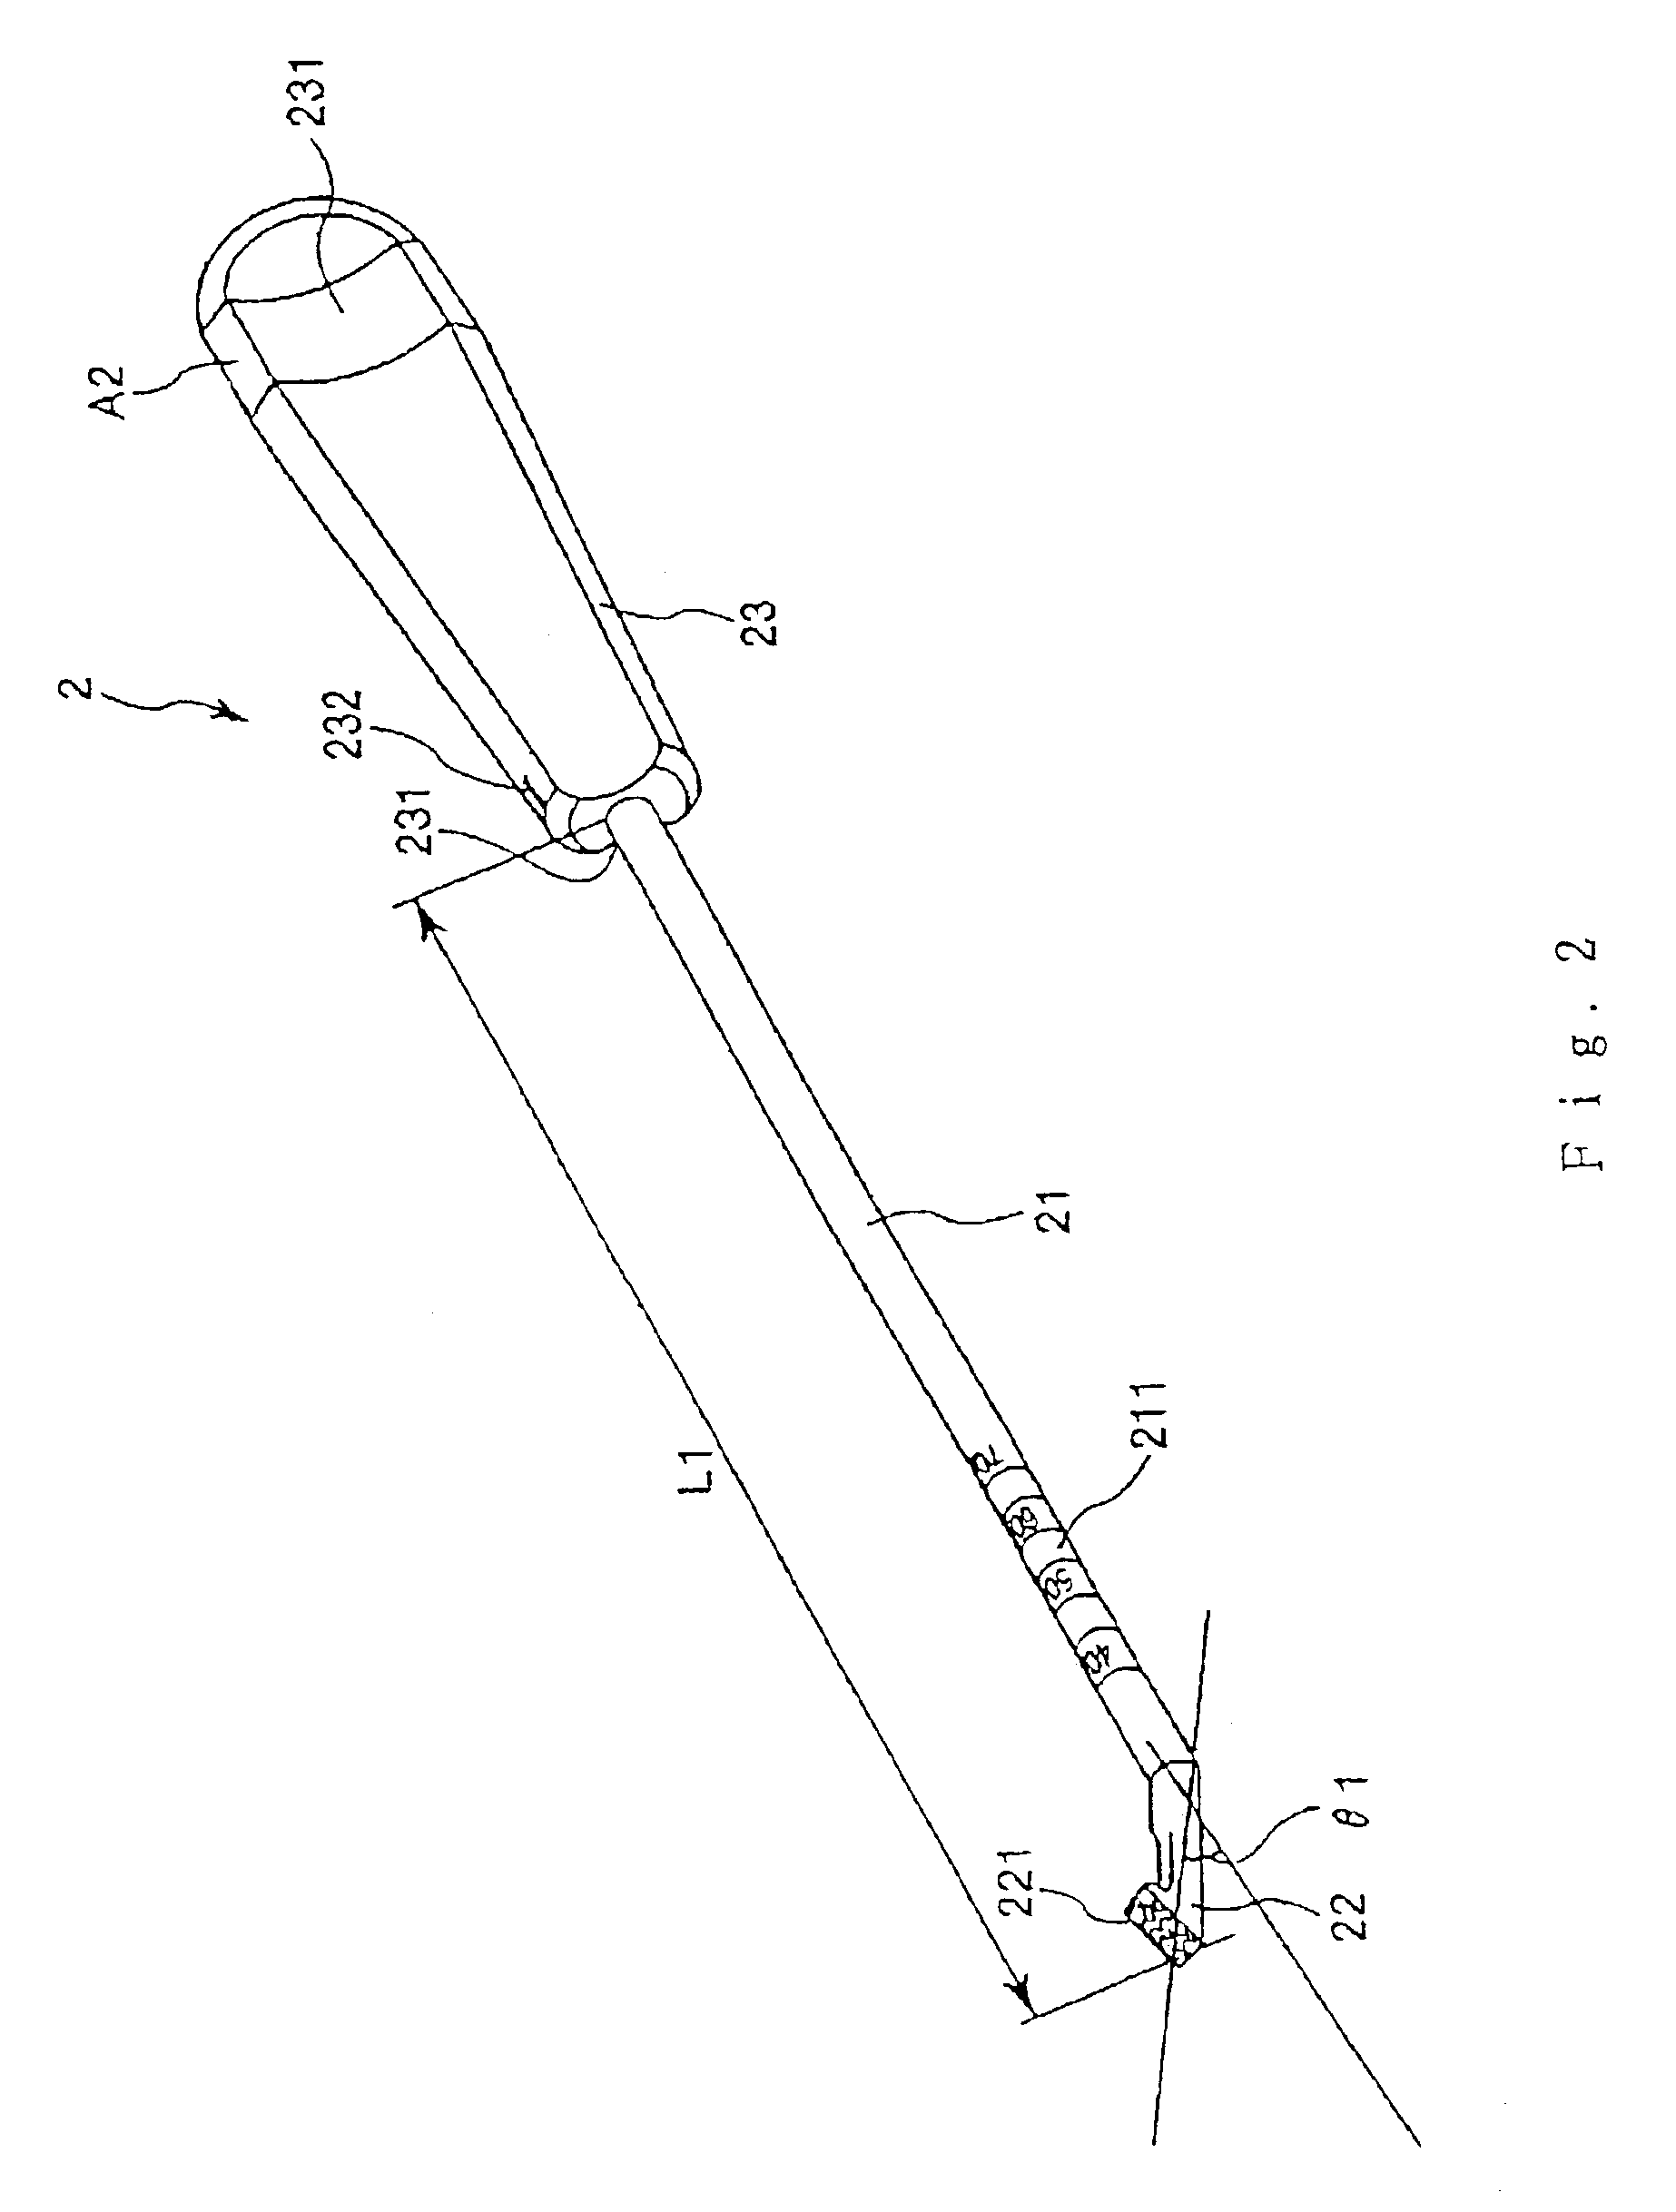 Surgical instruments and a set of surgical instruments for use in treatment of vertebral bodies